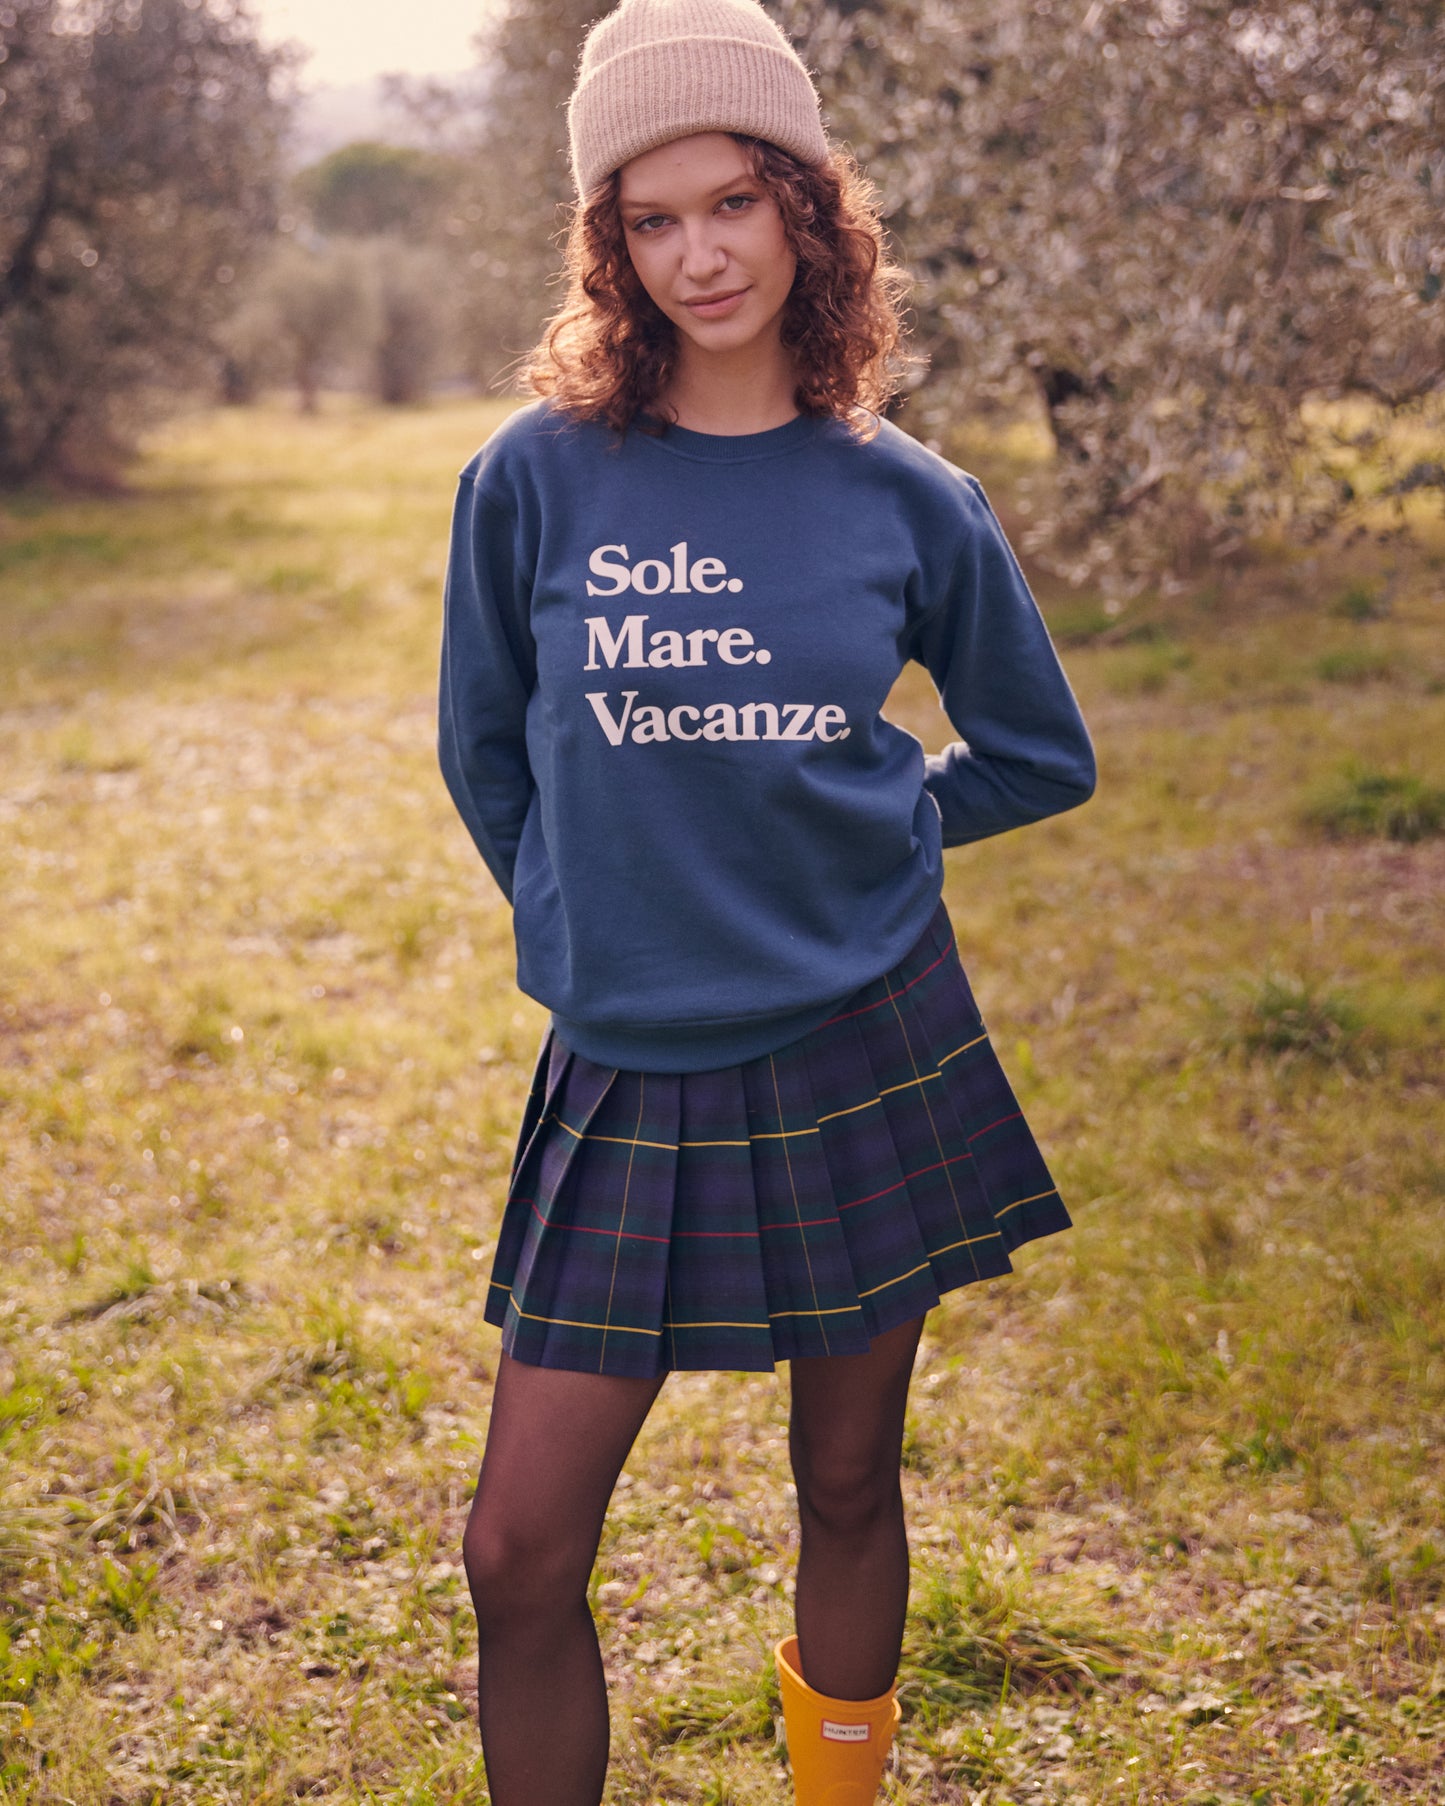 Say buongiorno Italia with our solemarevacanze sweatshirt. Organic fabric. Product designed in Italy and made in Poland.